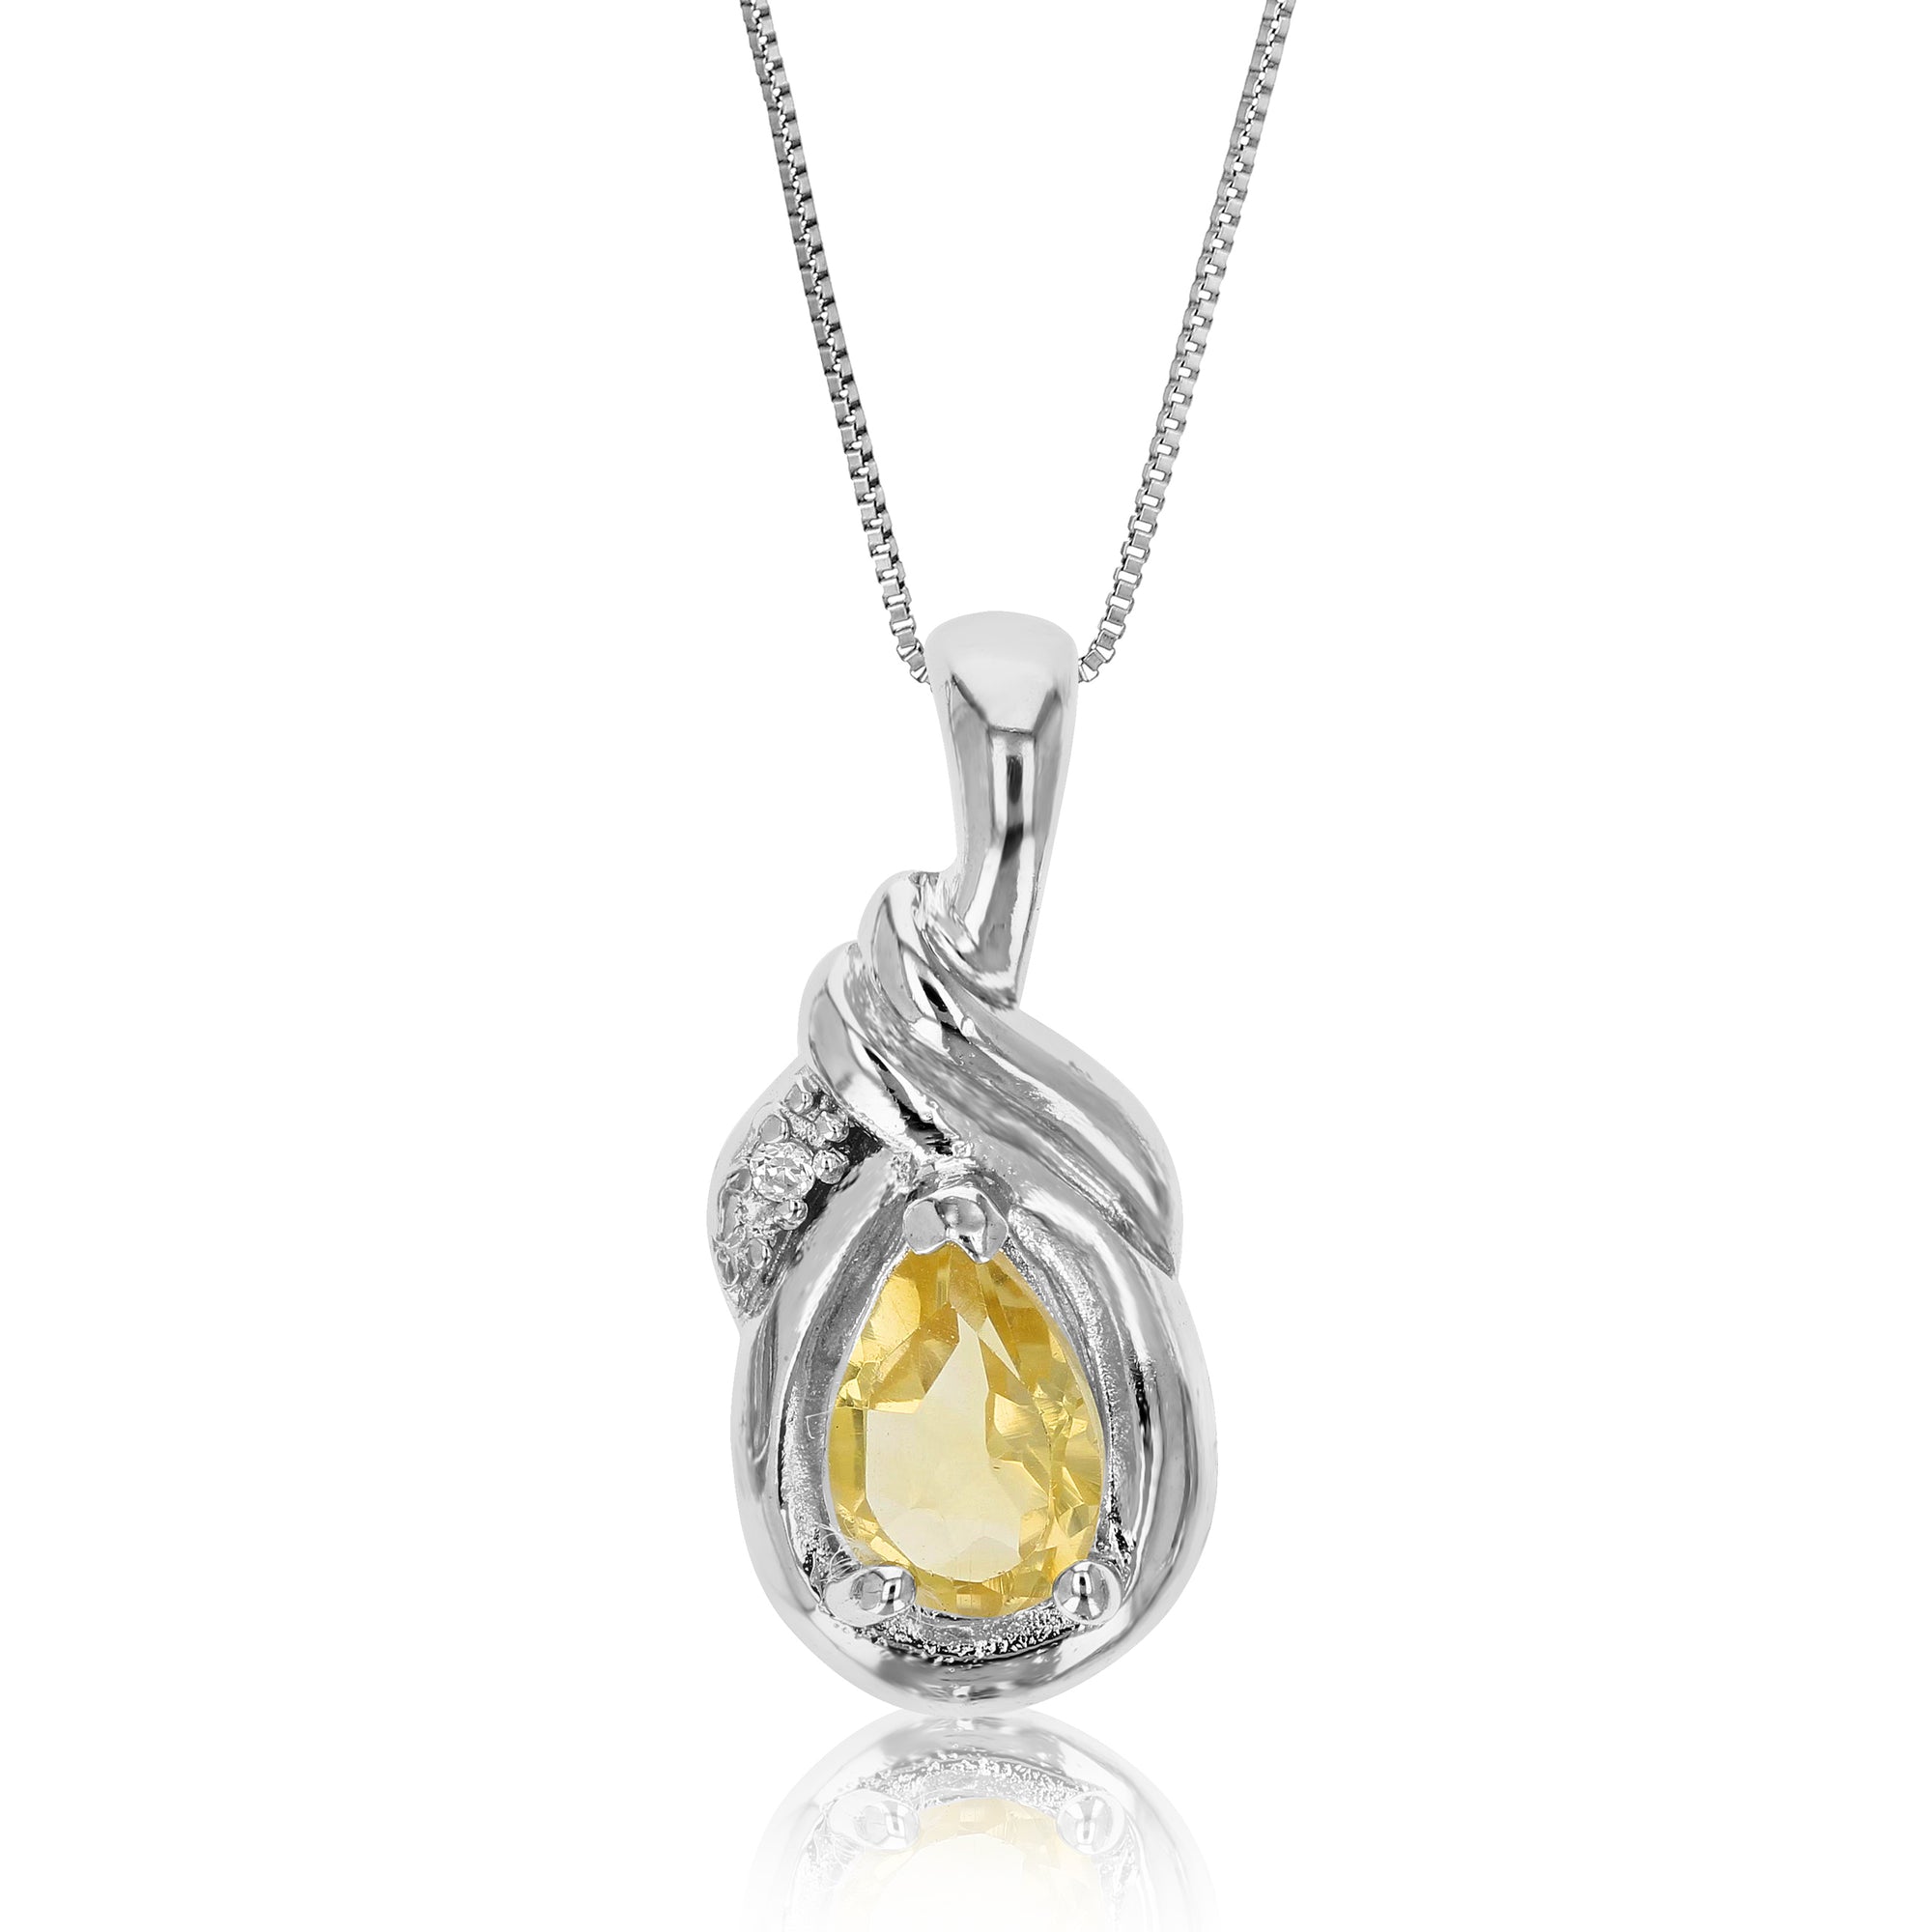 0.45 cttw Pendant Necklace, Citrine Pear Shape Pendant Necklace for Women in .925 Sterling Silver with Rhodium, 18 Inch Chain, Prong Setting